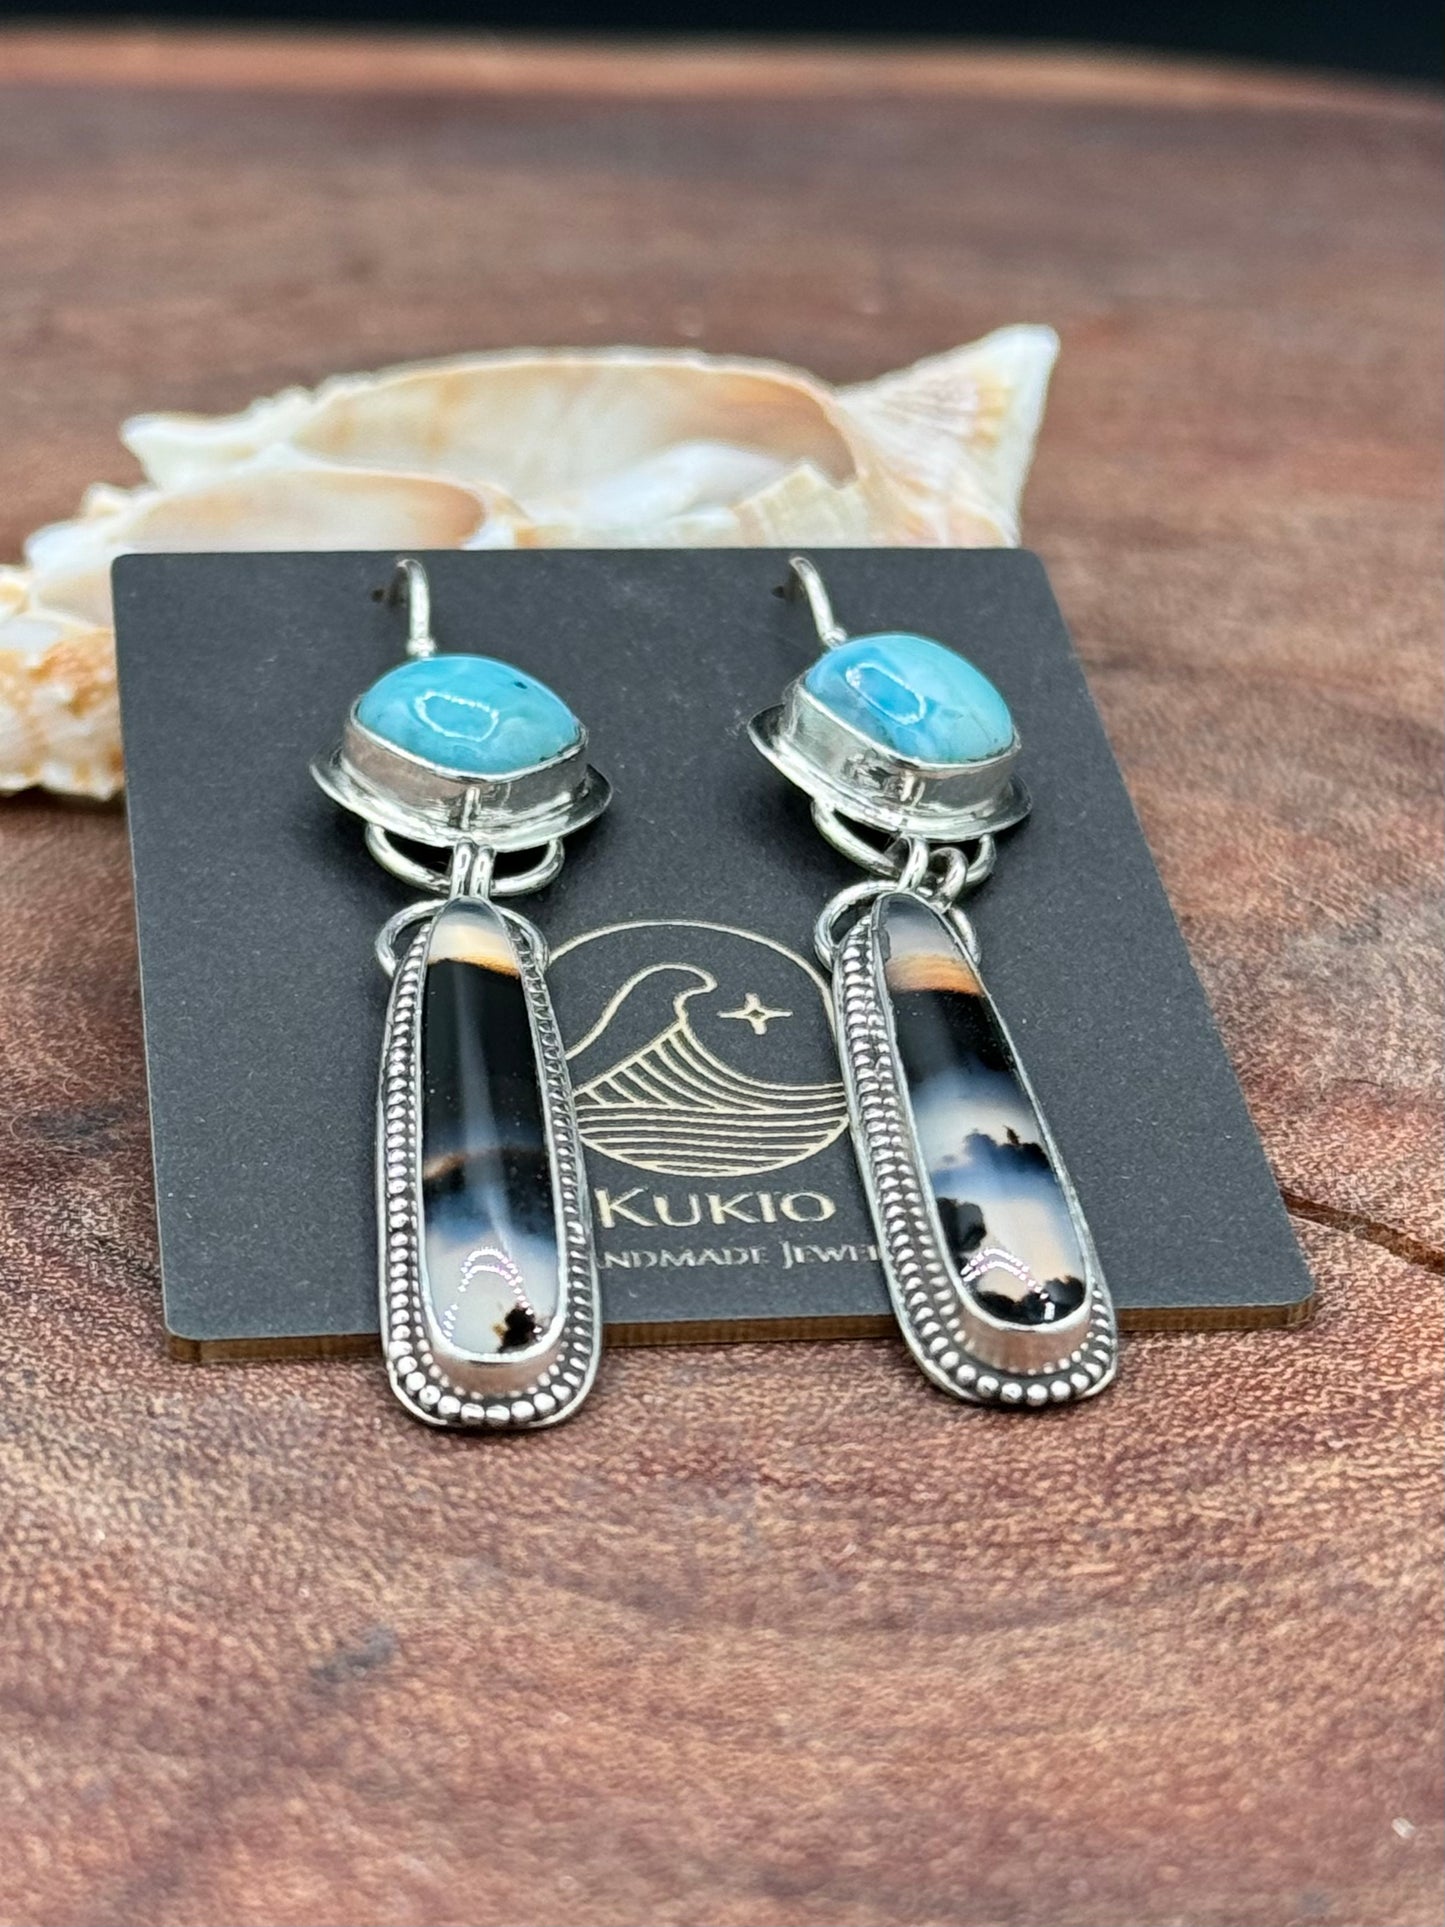 Montana Agate and Larimar Sterling Silver Earrings